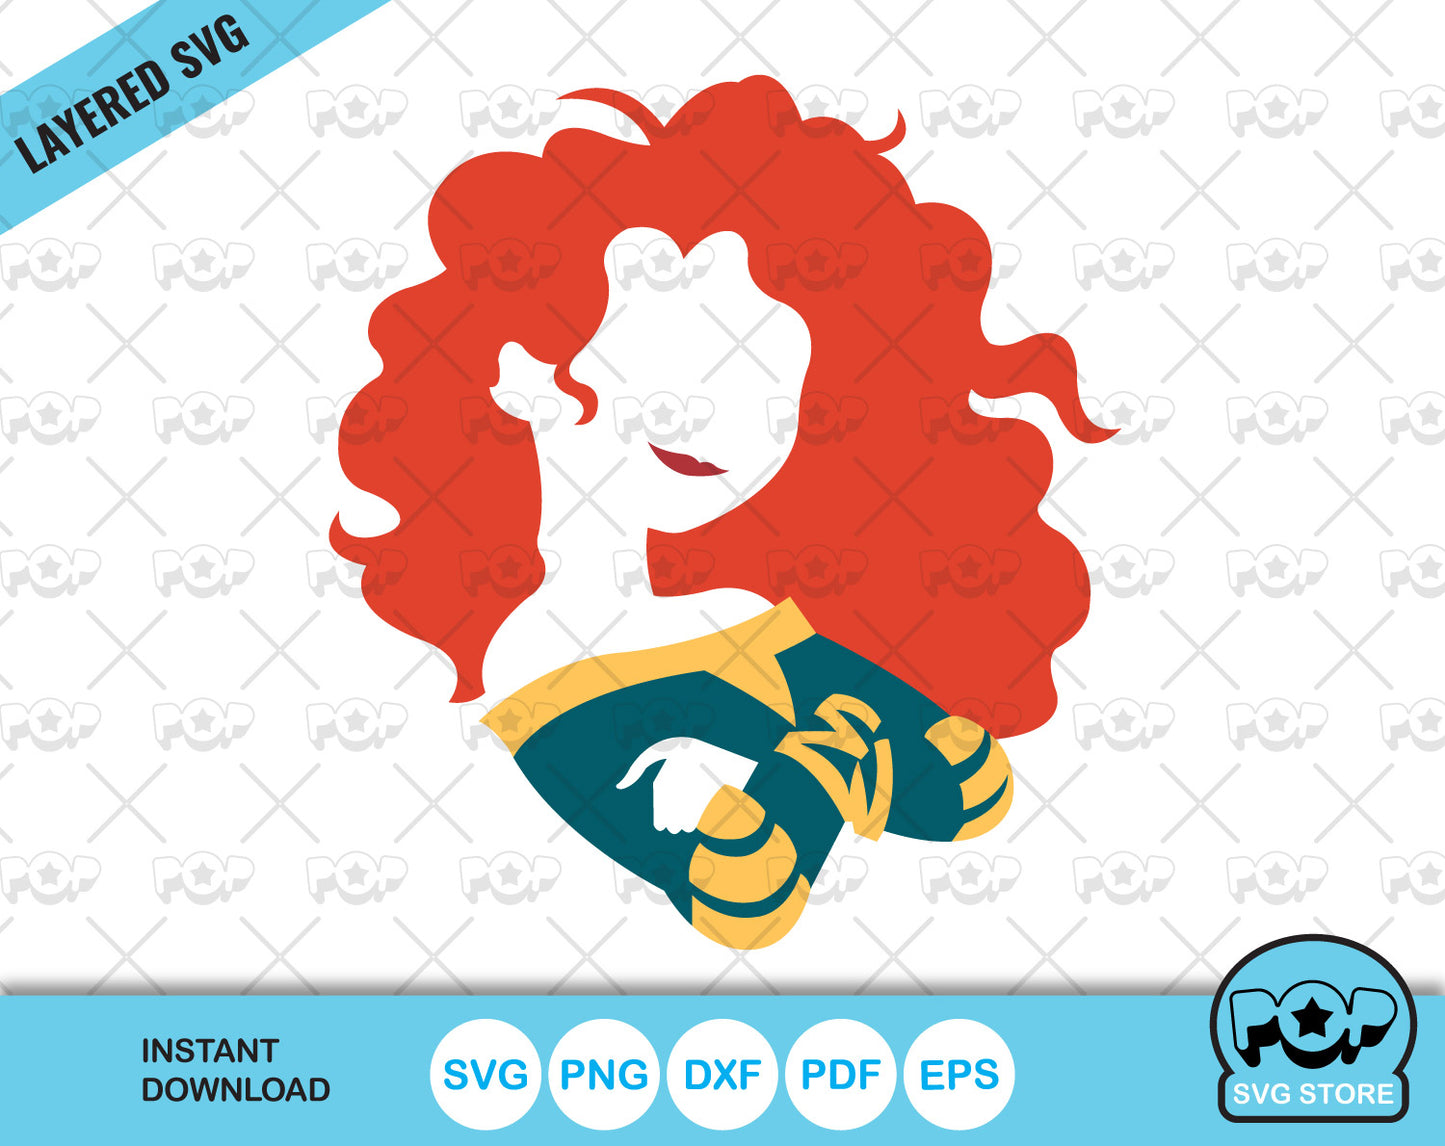 Princess Merida clipart, Disney Brave SVG cutting files for cricut silhouette, SVG, PNG, DXF, instant download